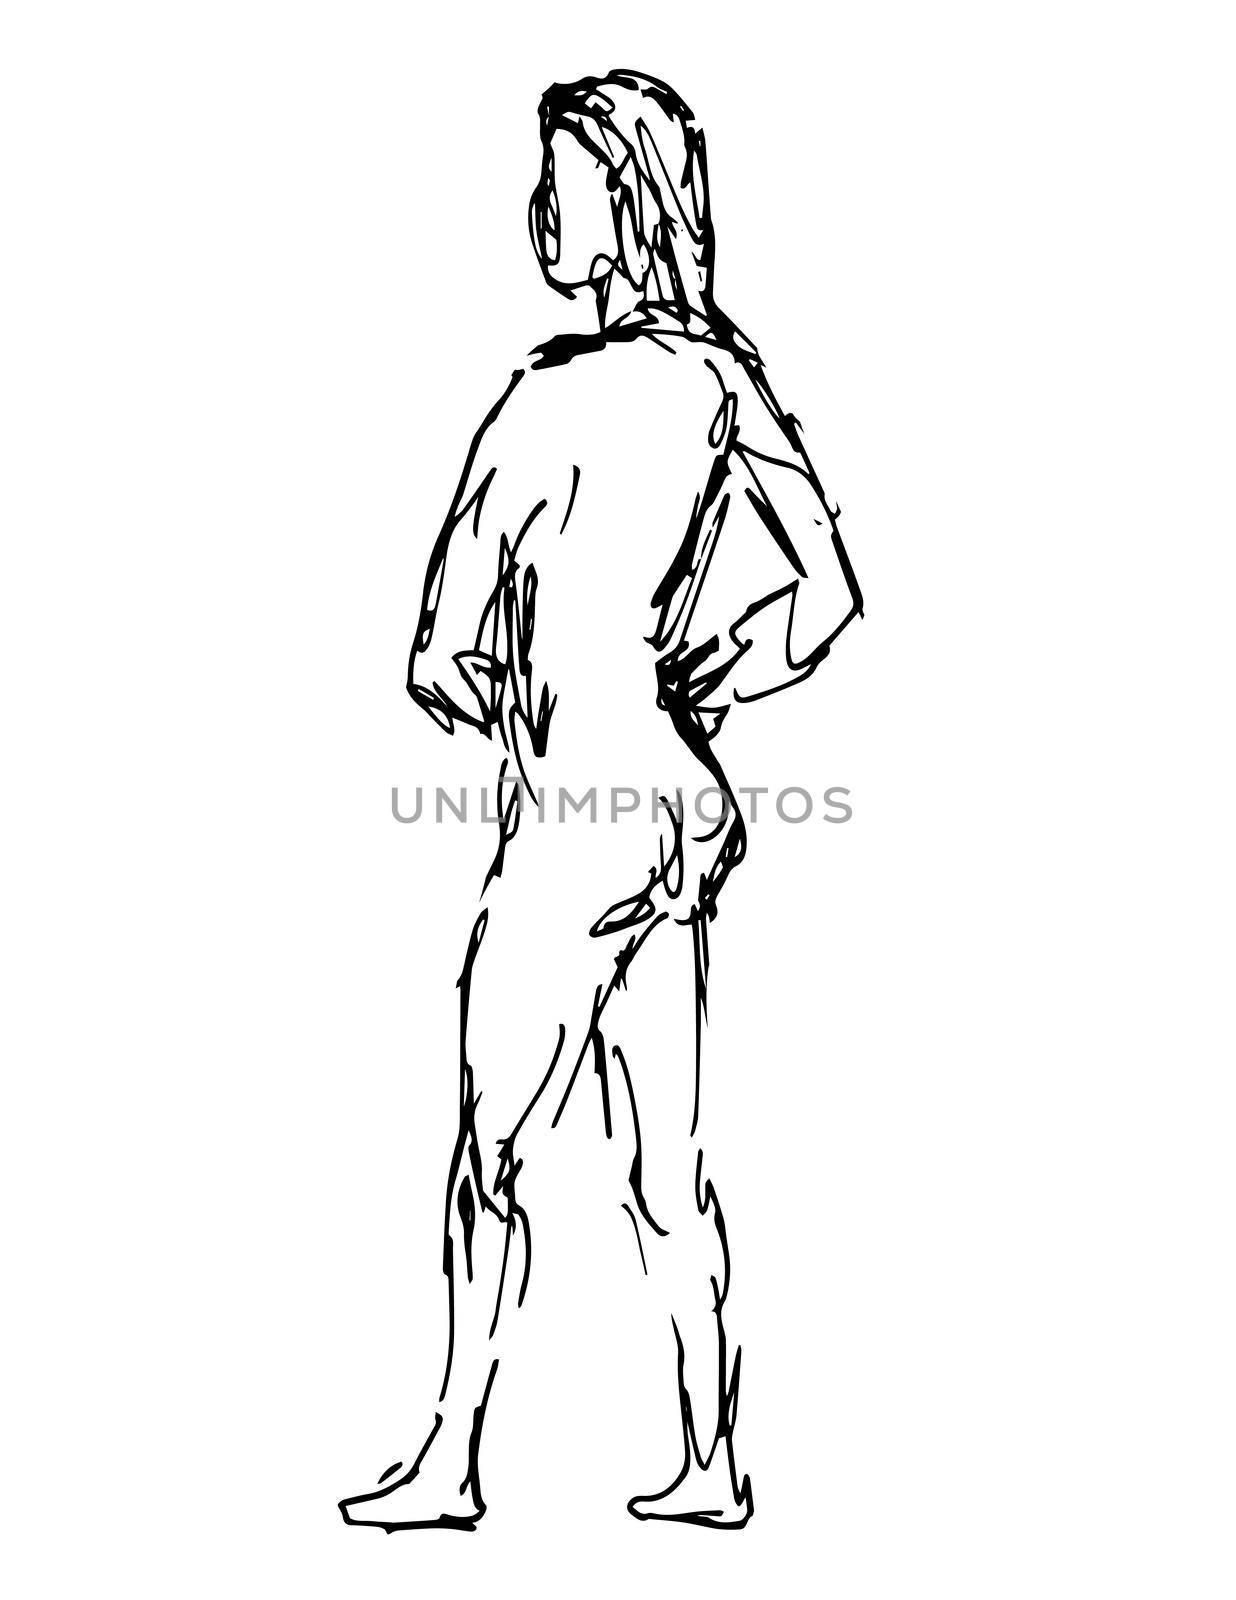 Nude Female Figure Standing Hands on Hip Side View Doodle Art Continuous Line Drawing  by patrimonio